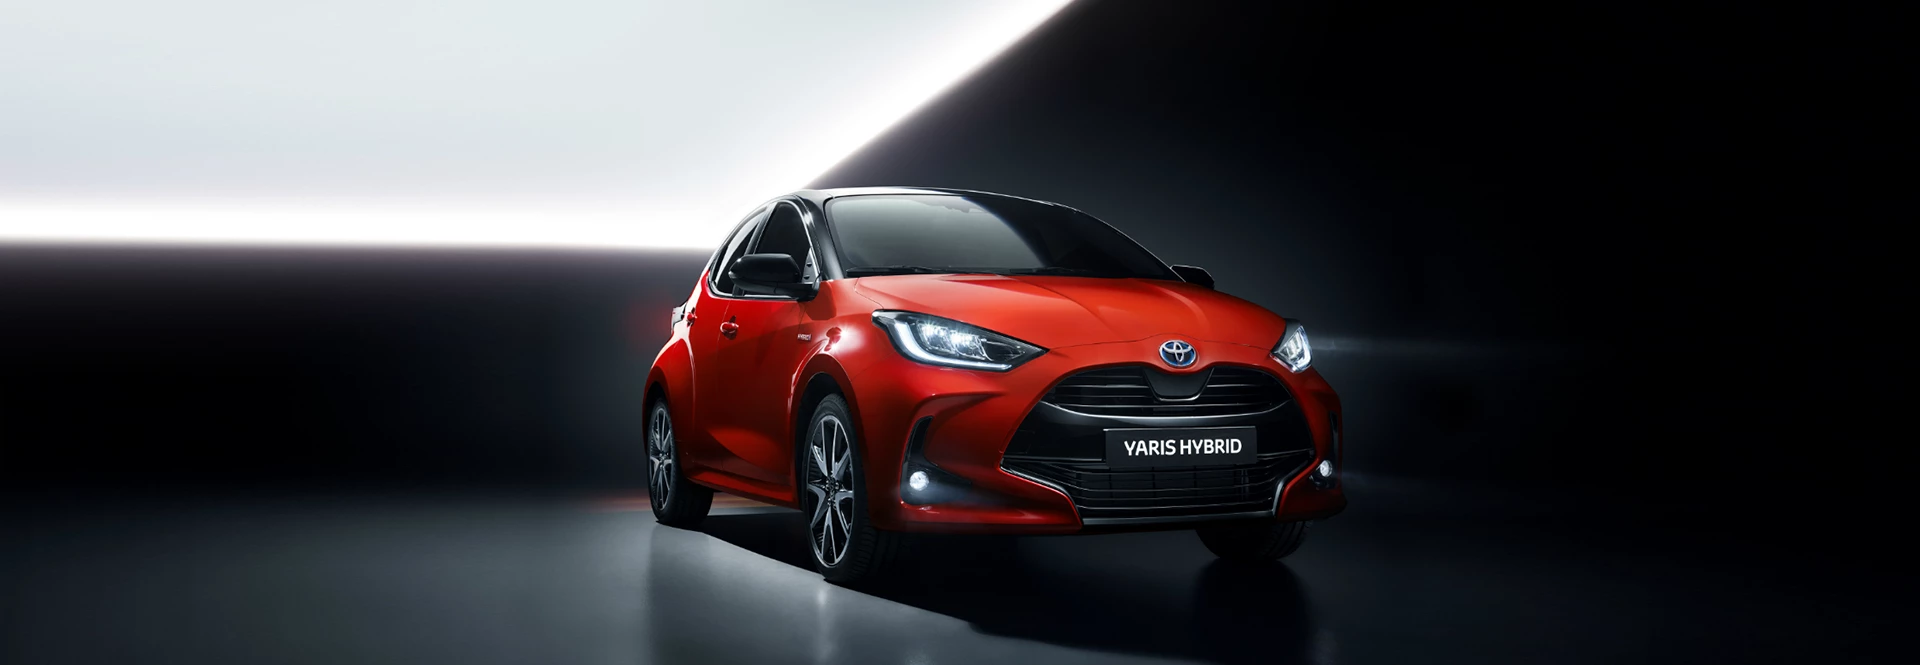 News Landing Image The Toyota Yaris has reached 10 million global sales in its 25th year of production